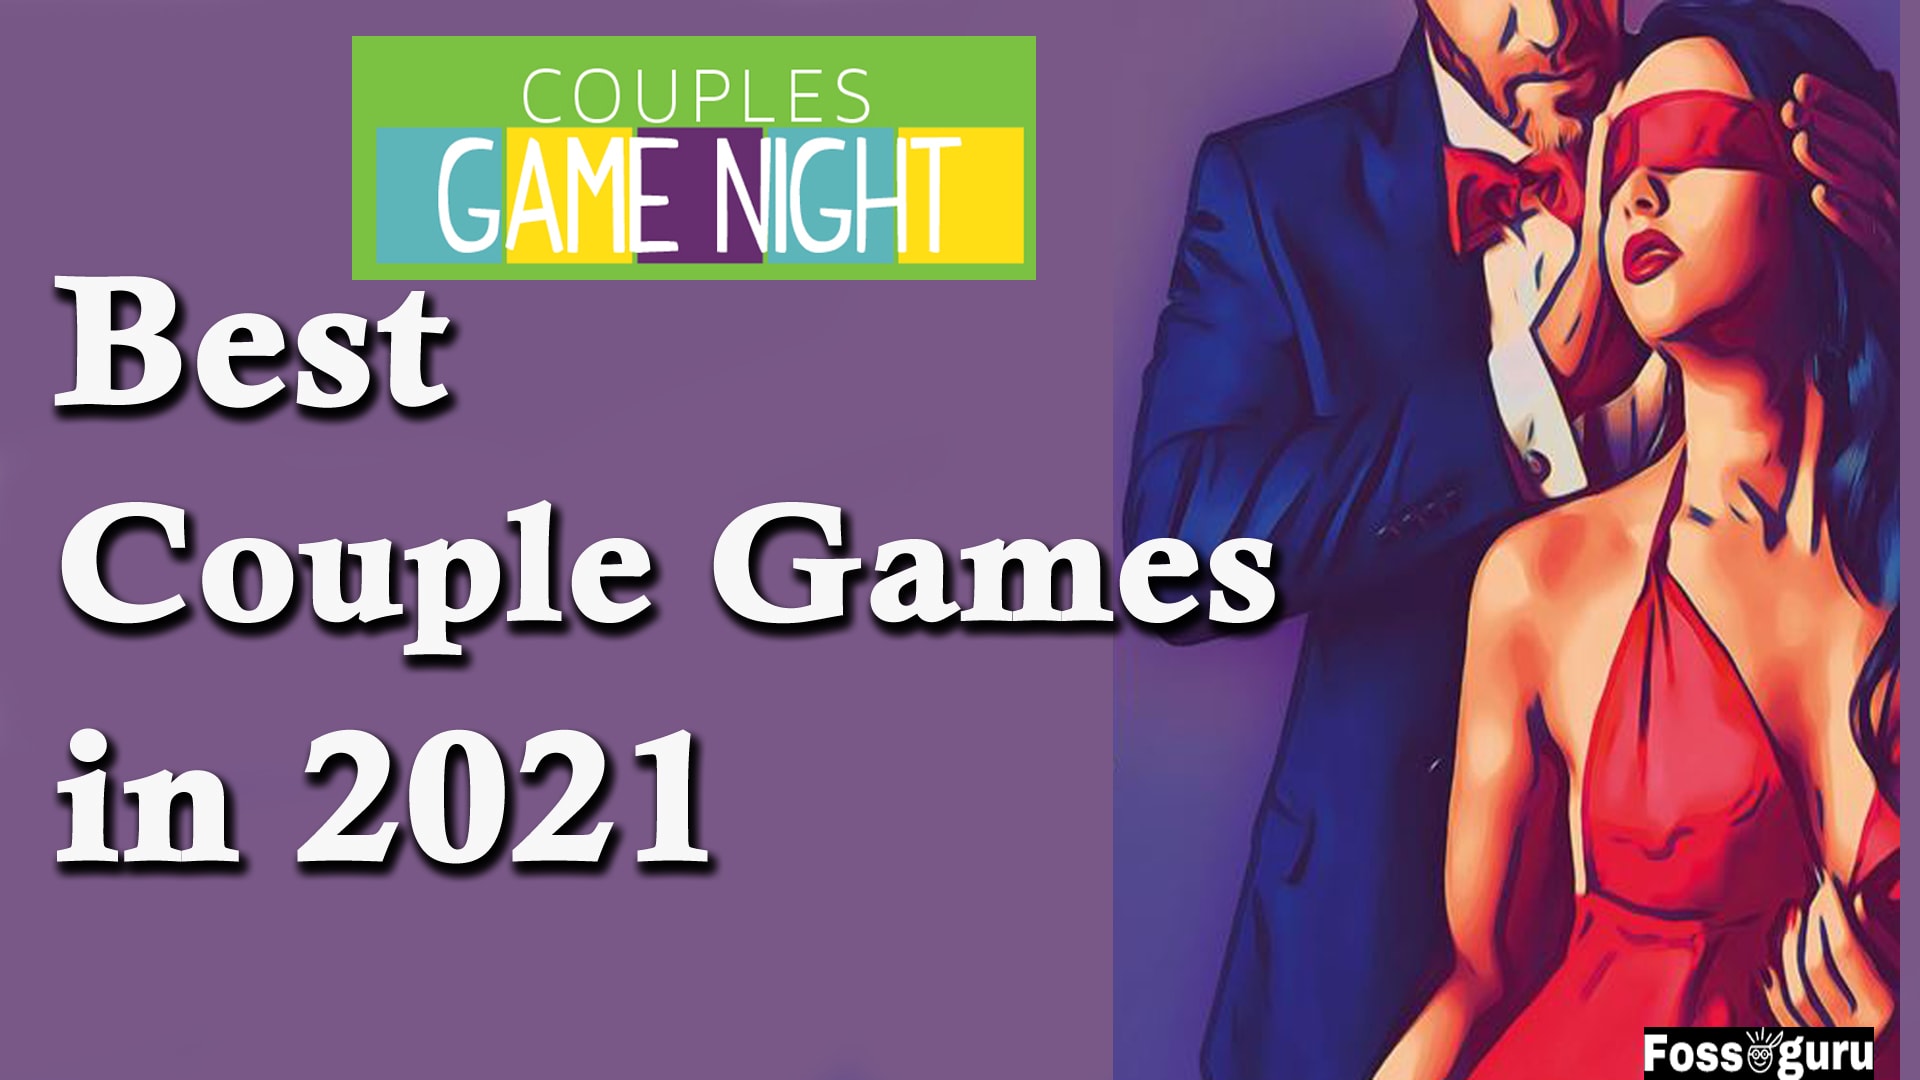 Best 20 Online Games for Couples in Romantic Date Night